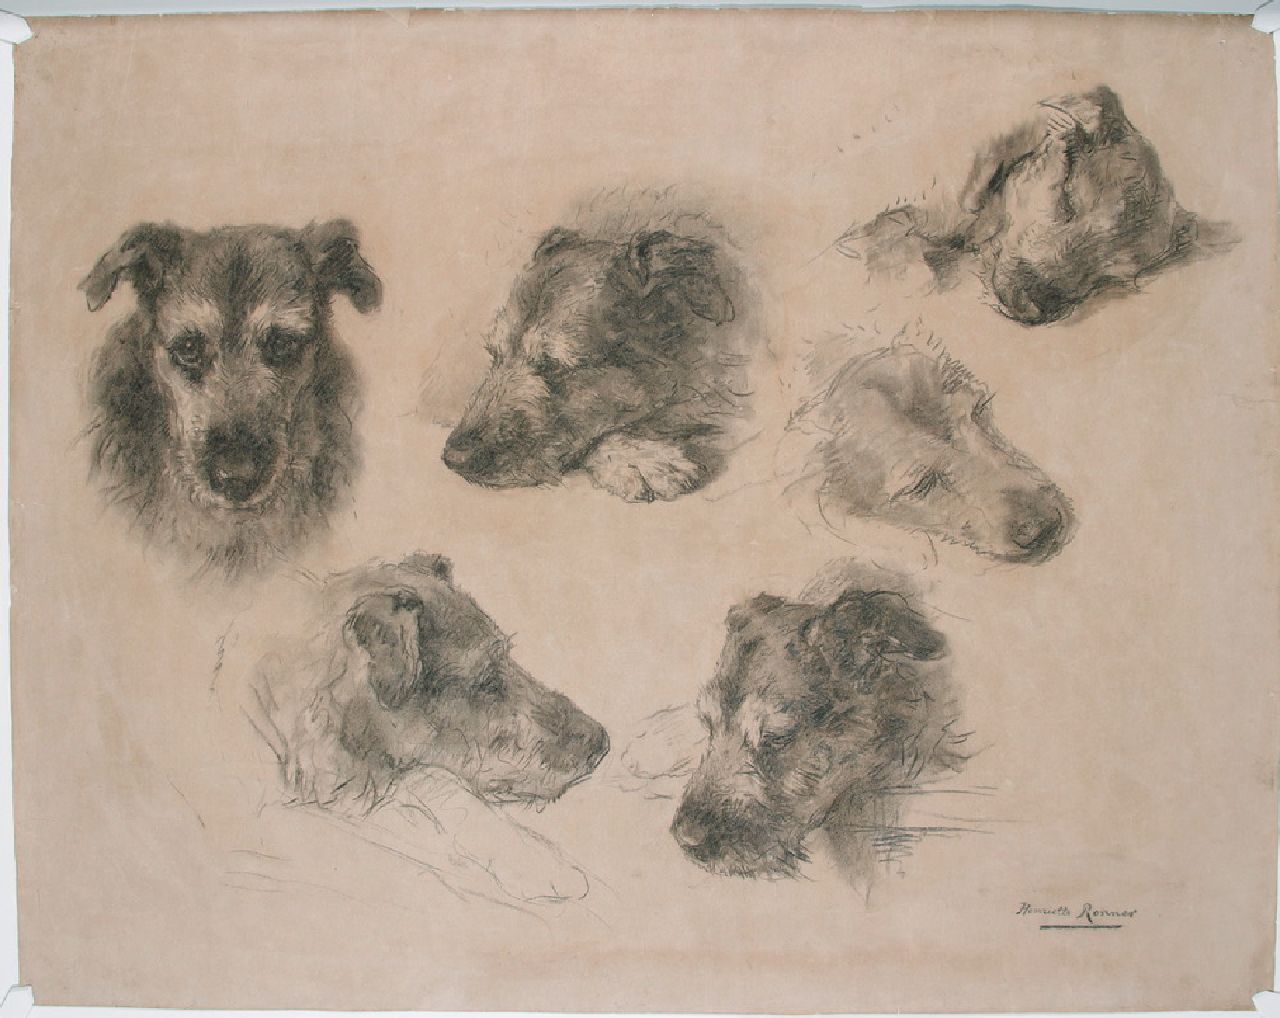 Ronner-Knip H.  | Henriette Ronner-Knip, Sketches of a dog, charcoal on paper 76.4 x 96.3 cm, signed l.r.